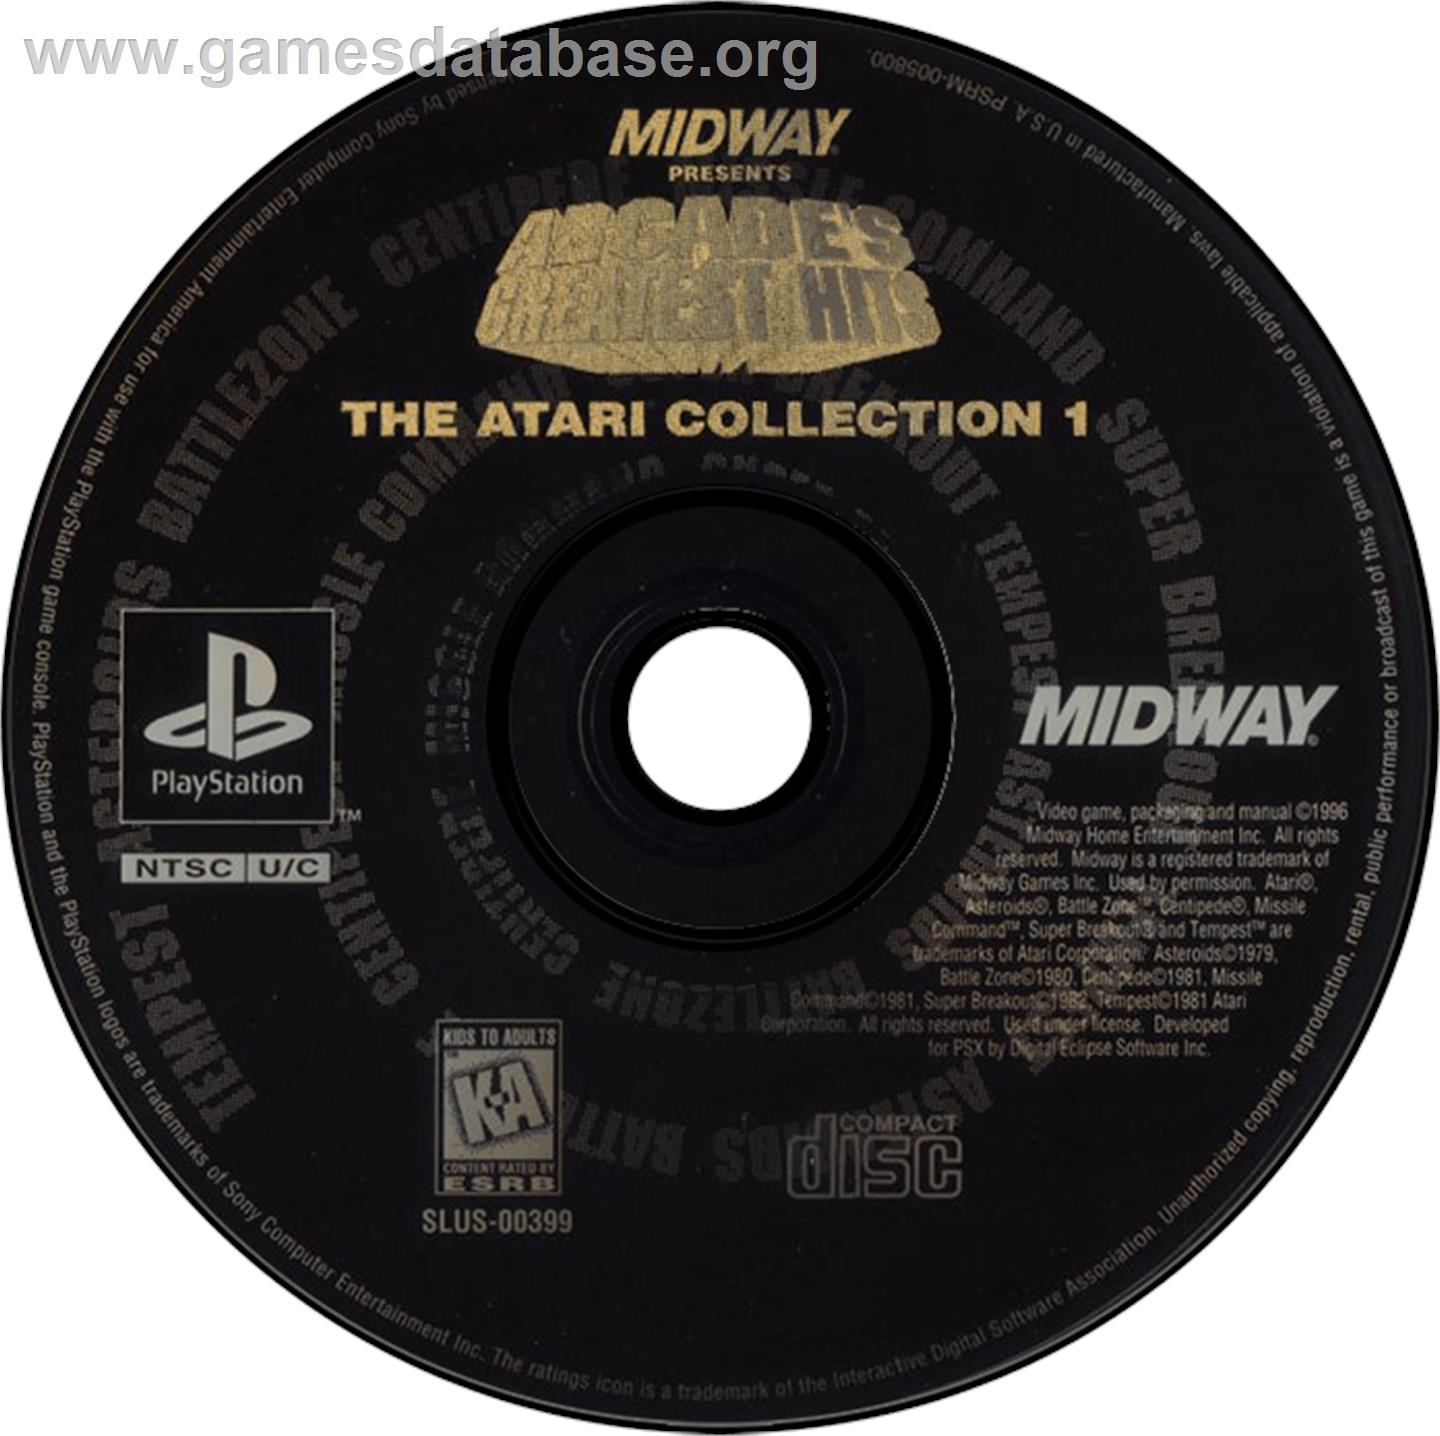 Arcade's Greatest Hits: The Atari Collection 1 - Sony Playstation - Artwork - Disc